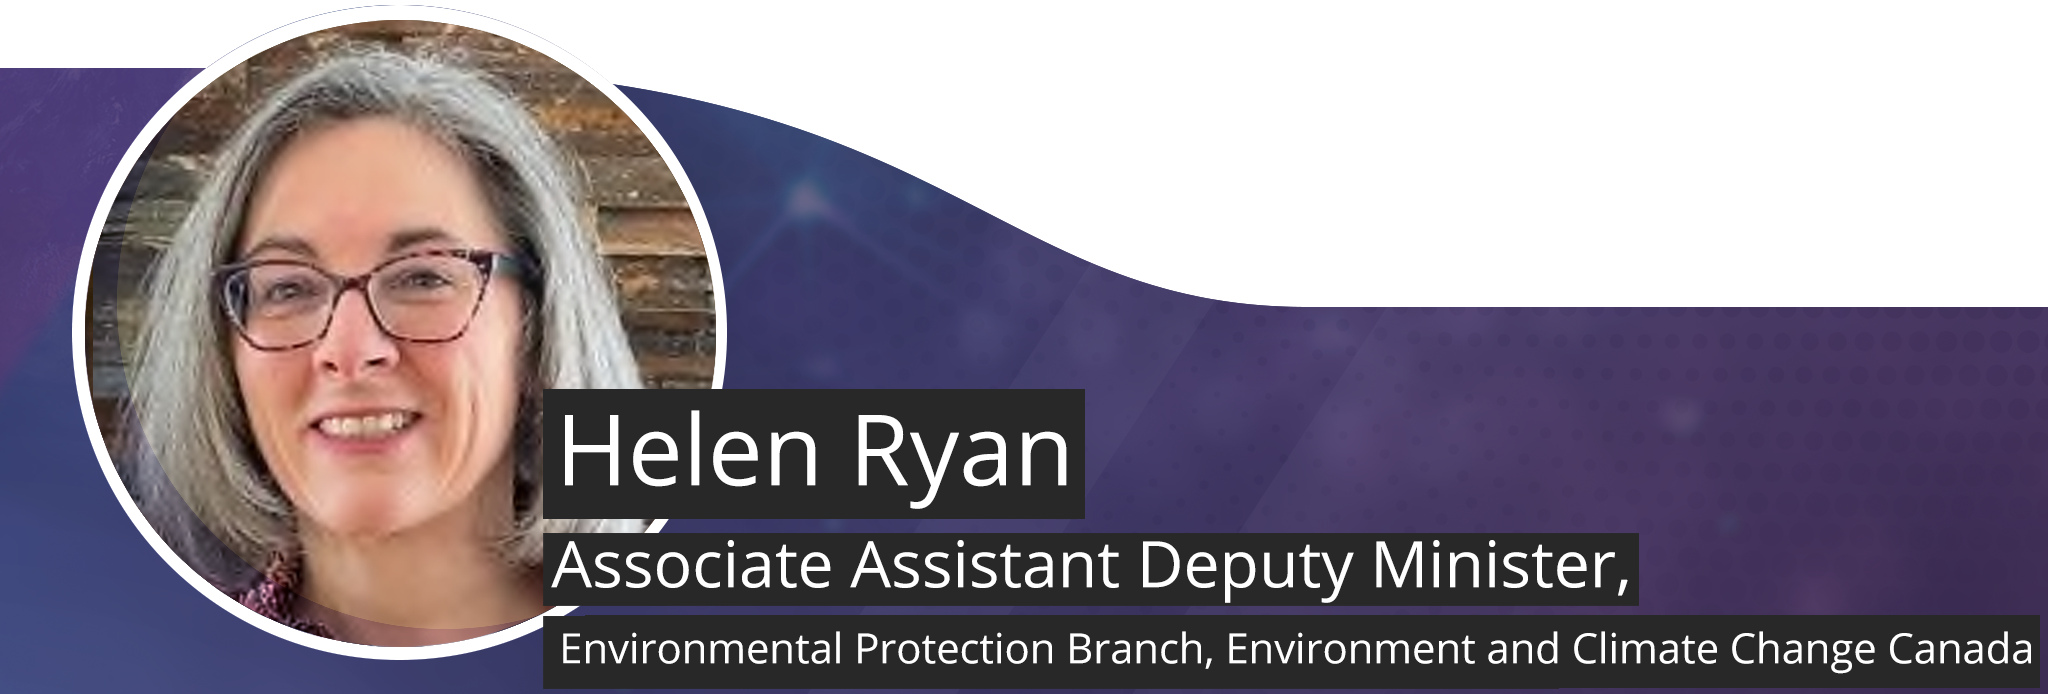 Headshot of Helen Ryan, Associate Assistant Deputy Minister of the Environmental Protection Branch, Environment and Climate Change Canada